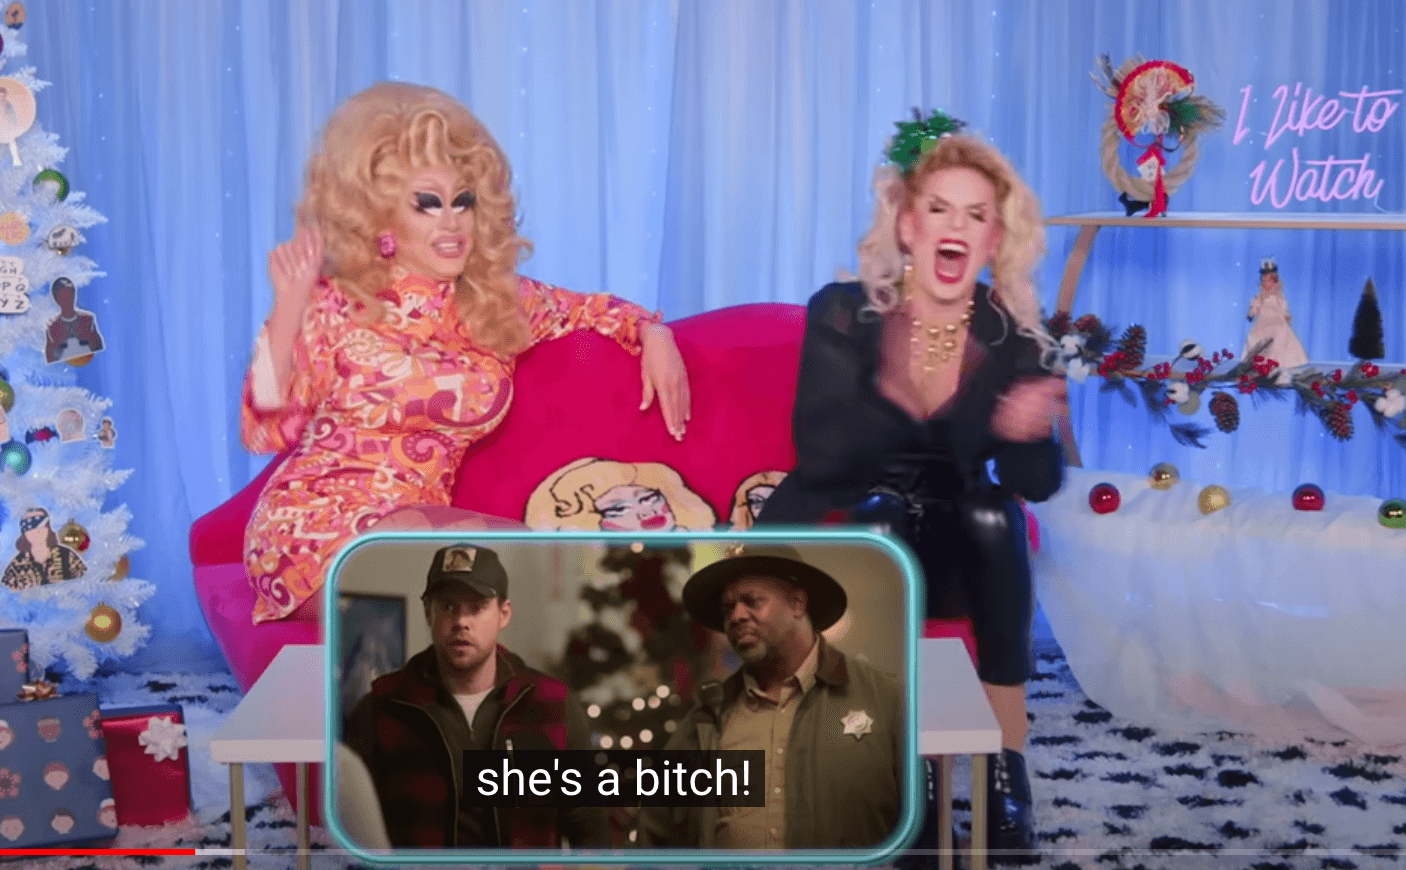 Screenshot from 'I like to watch" Youtube series showing drag queens Trixie and Katya saying "she's a bitch!"